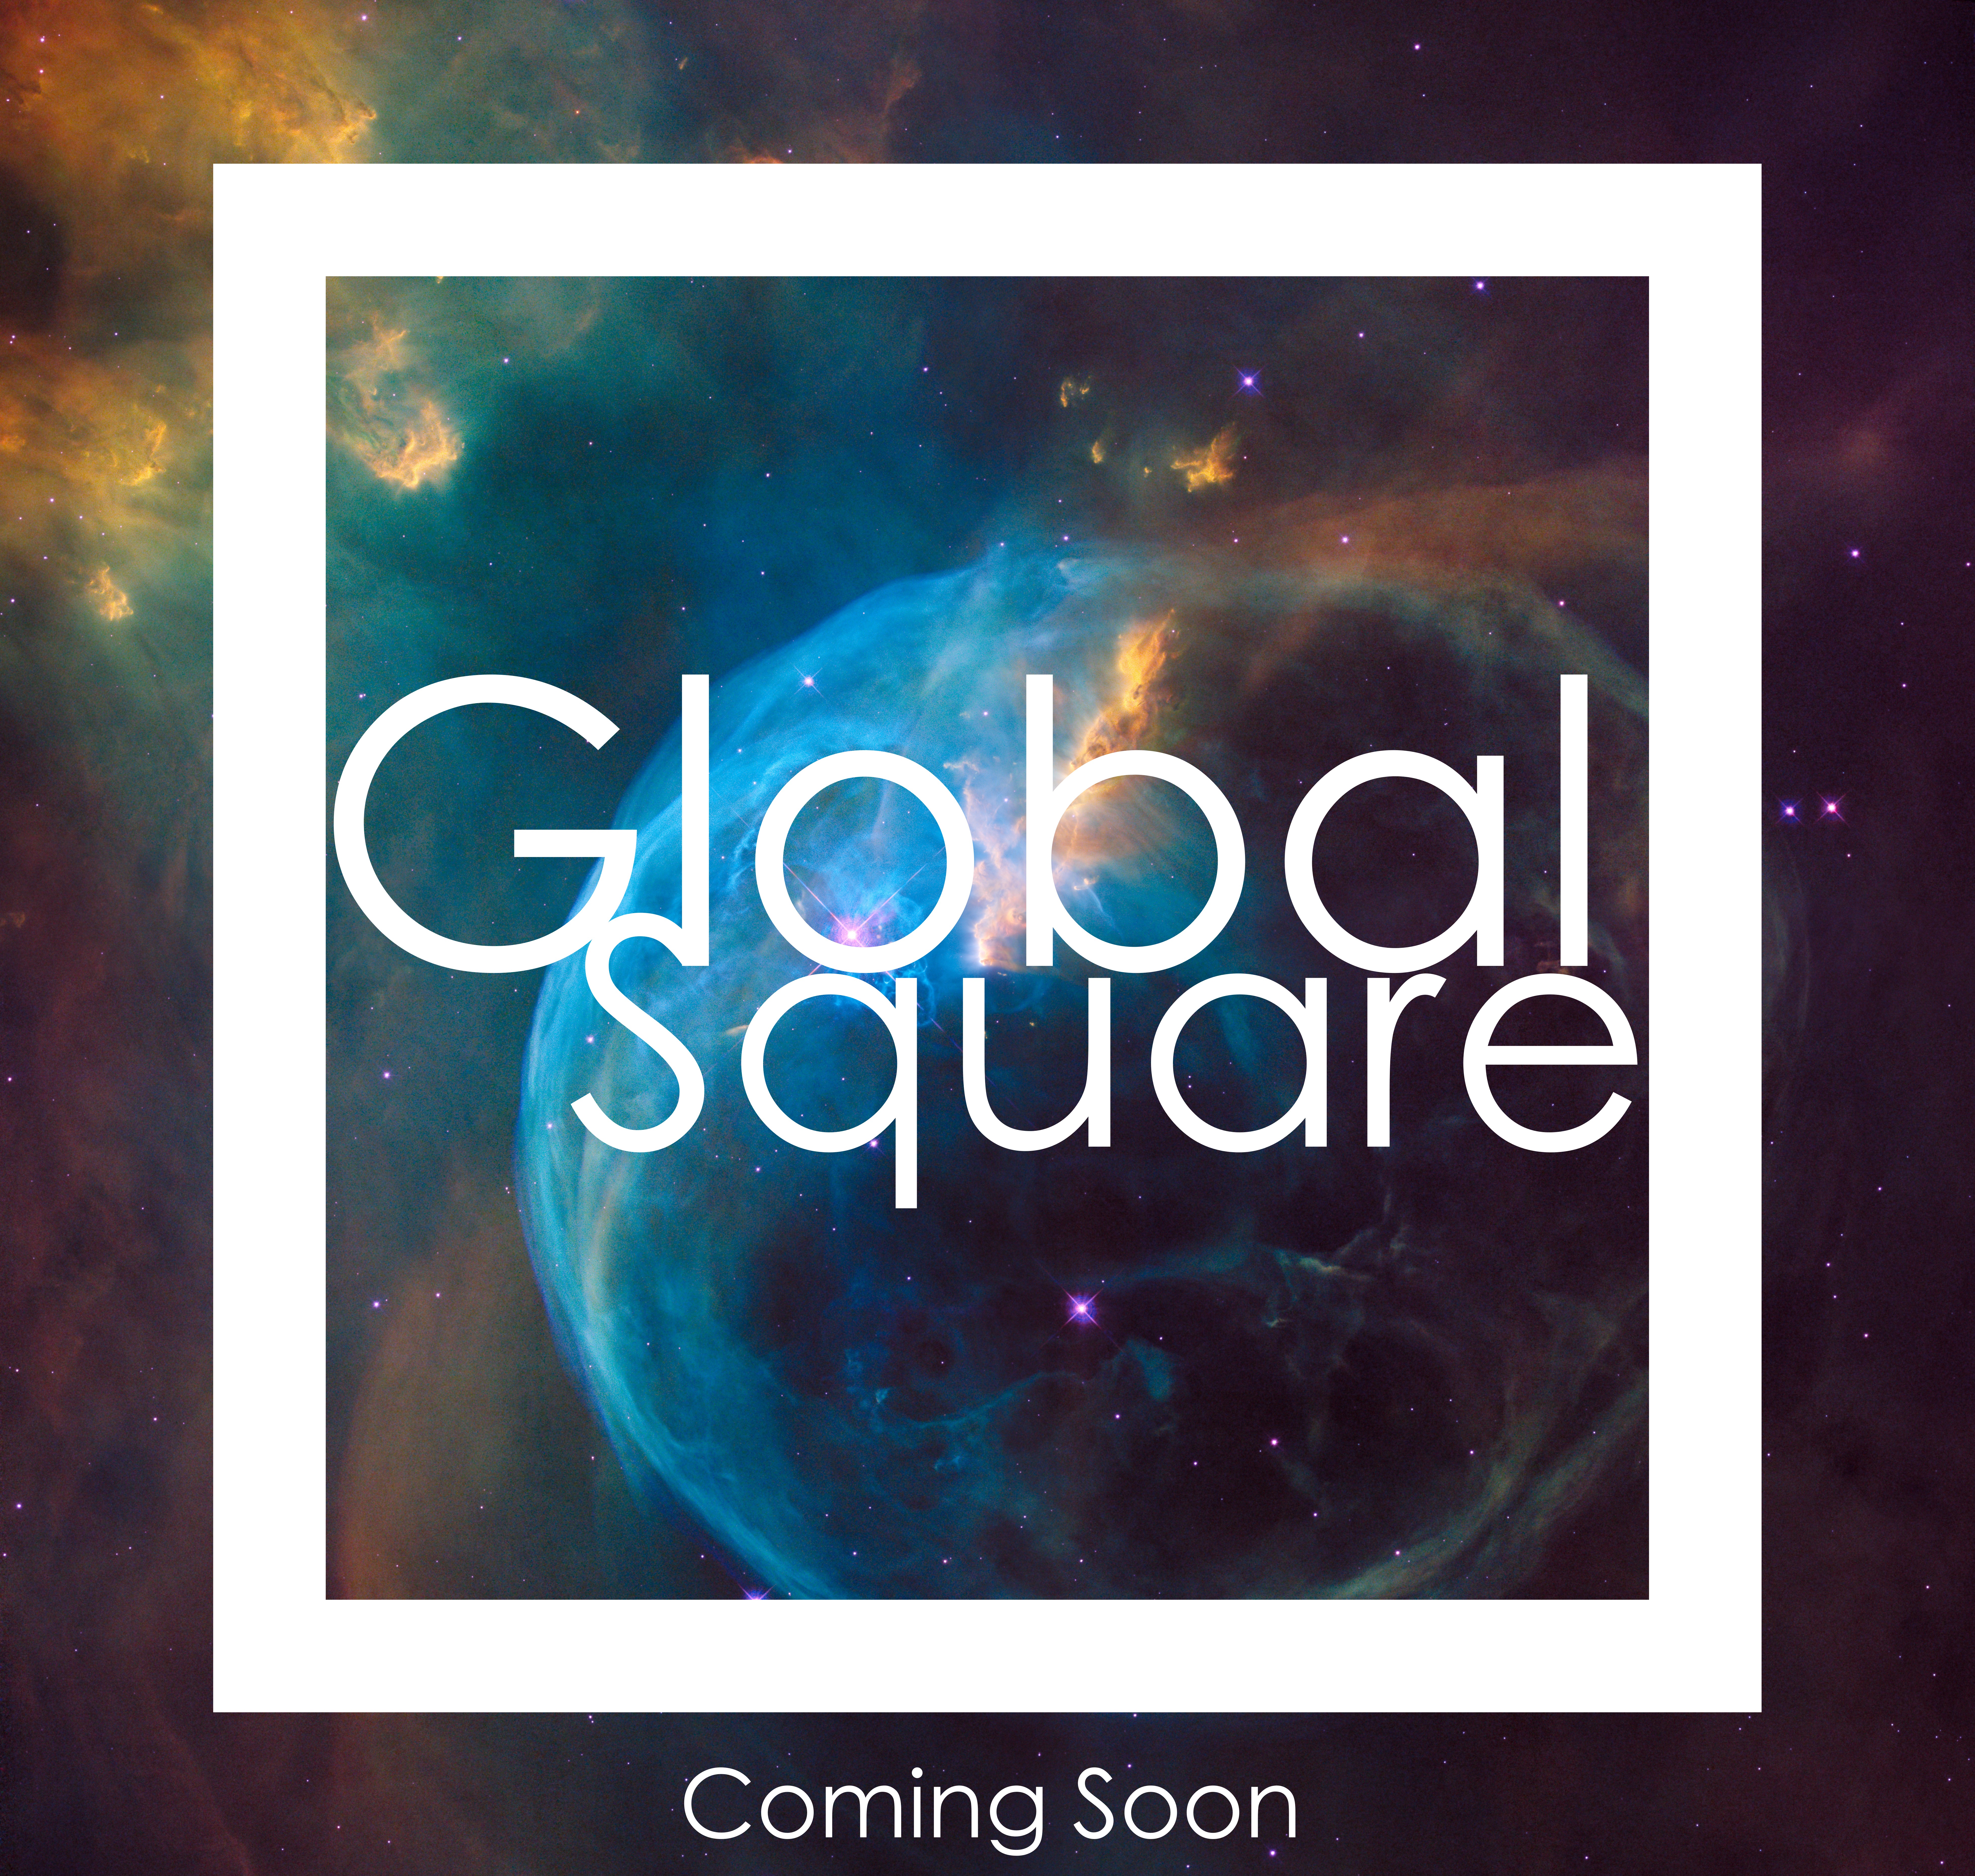 global square coming soon